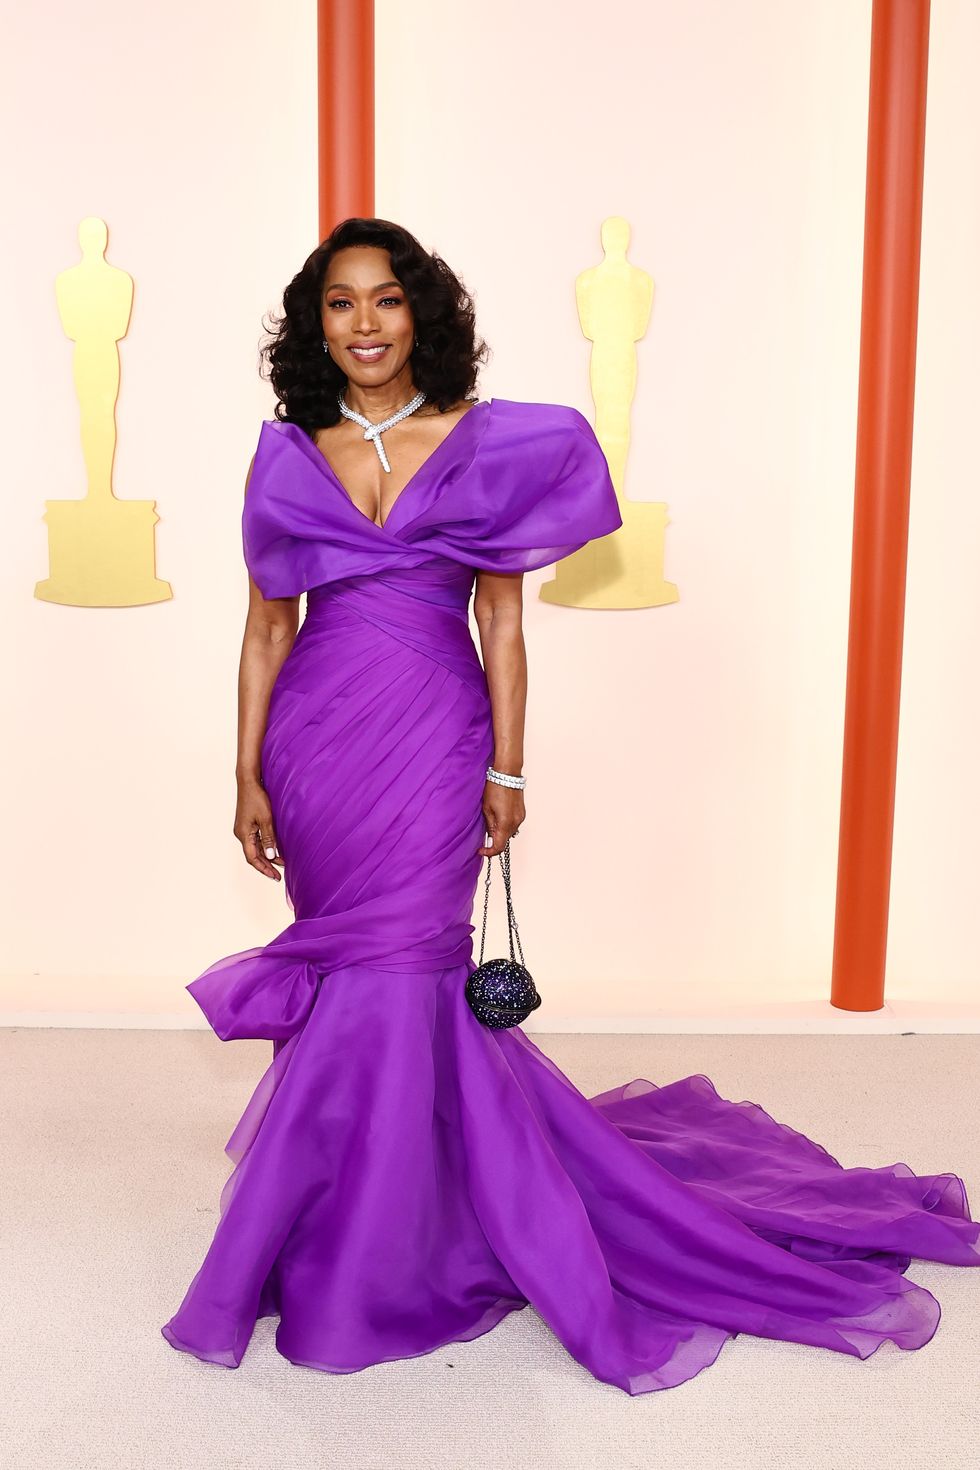 Red carpet fashion at the Oscars 2019